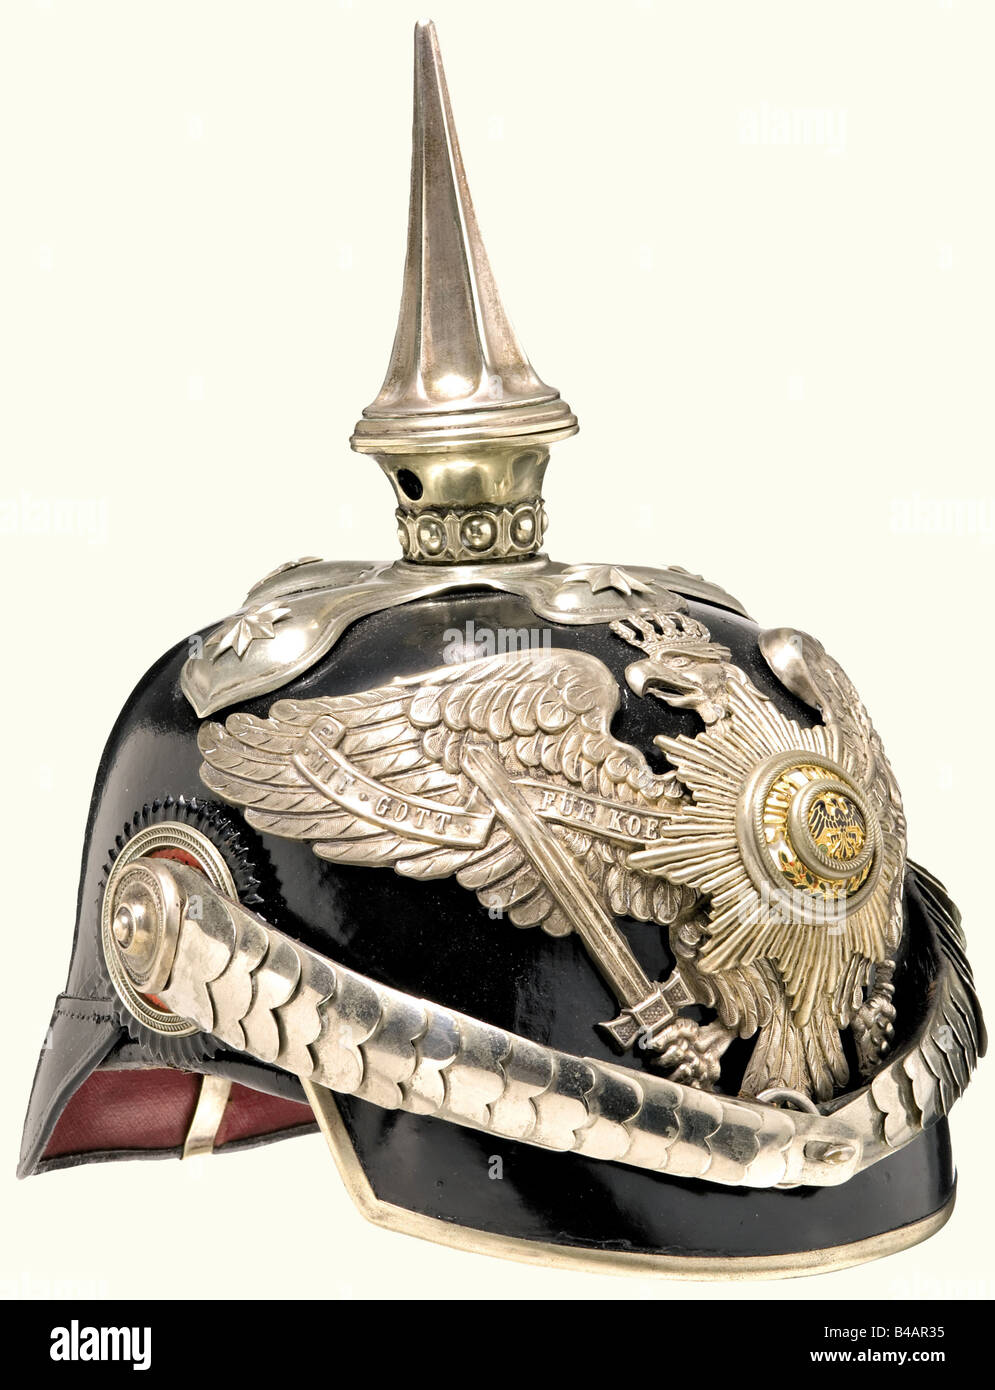 A model 91 helmet, for supernumerary generals Leather skull with silver mountings, fluted spike on a cross base, stars and plate with an enamelled star. Nickel-plated convex metal chinscales on rosette pins. Officer's cockade. Skull has been relacquered, and the mountings replaced with double holes. The cross is broken off the eagle's crown. Spike loose. Sweatband and ribbed silk lining torn. historic, historical, 19th century, Prussian, Prussia, German, Germany, militaria, military, object, objects, stills, clipping, clippings, cut out, cut-out, cut-outs, helm, Stock Photo